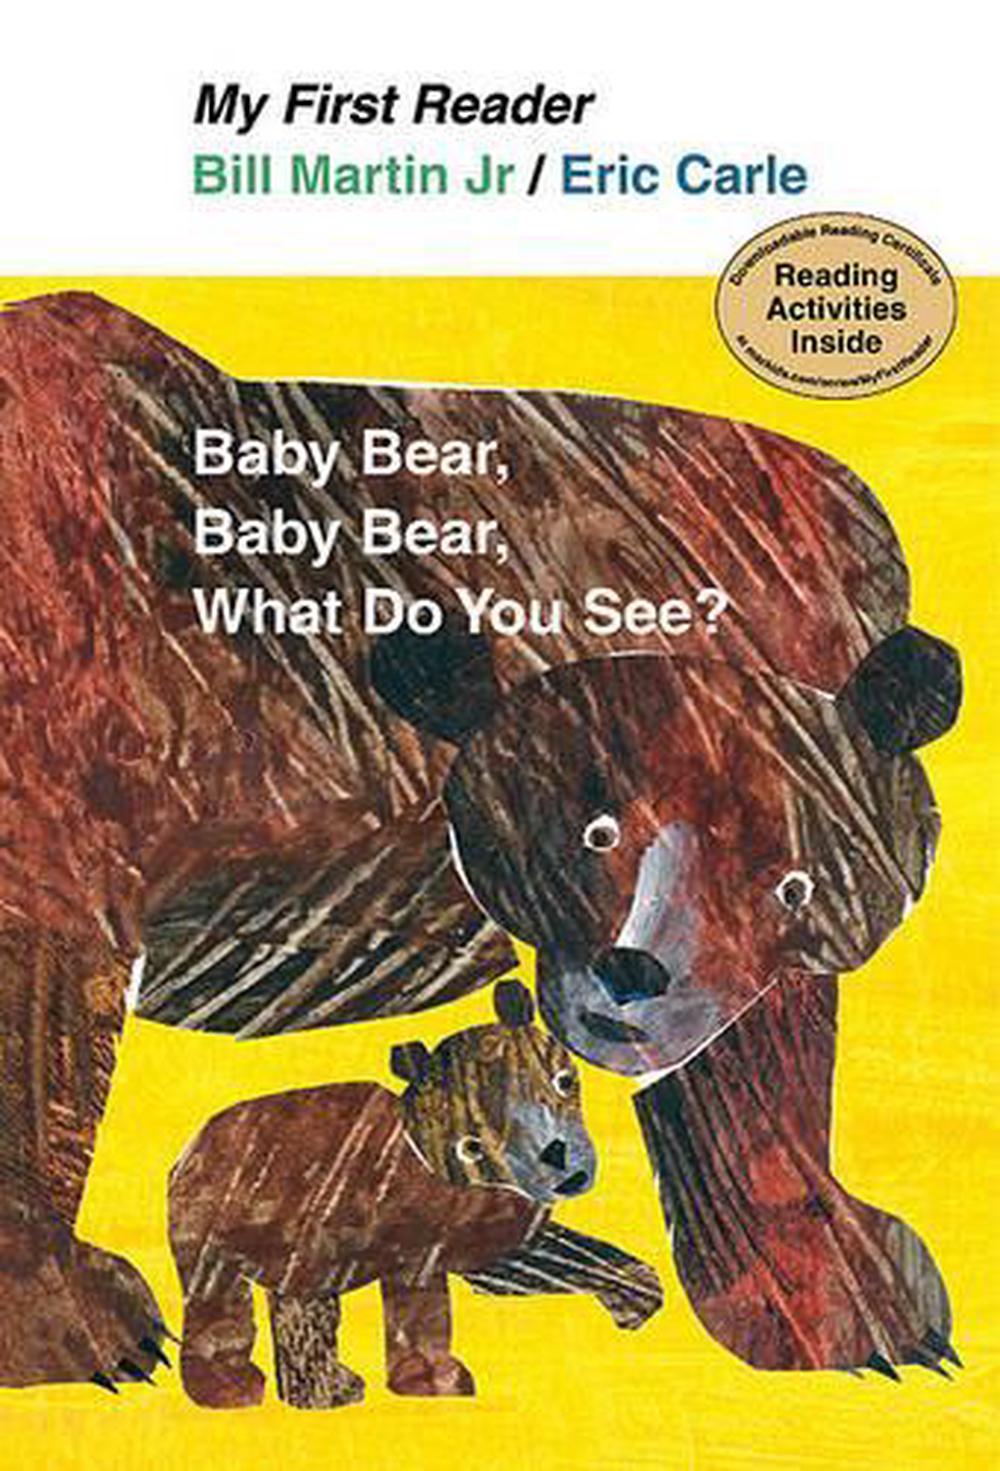 online　Hardcover,　See?　Baby　at　9780805092912　Martin,　Bear,　Jr.　What　You　Bear　Bill　Bear,　Buy　Do　by　The　Nile